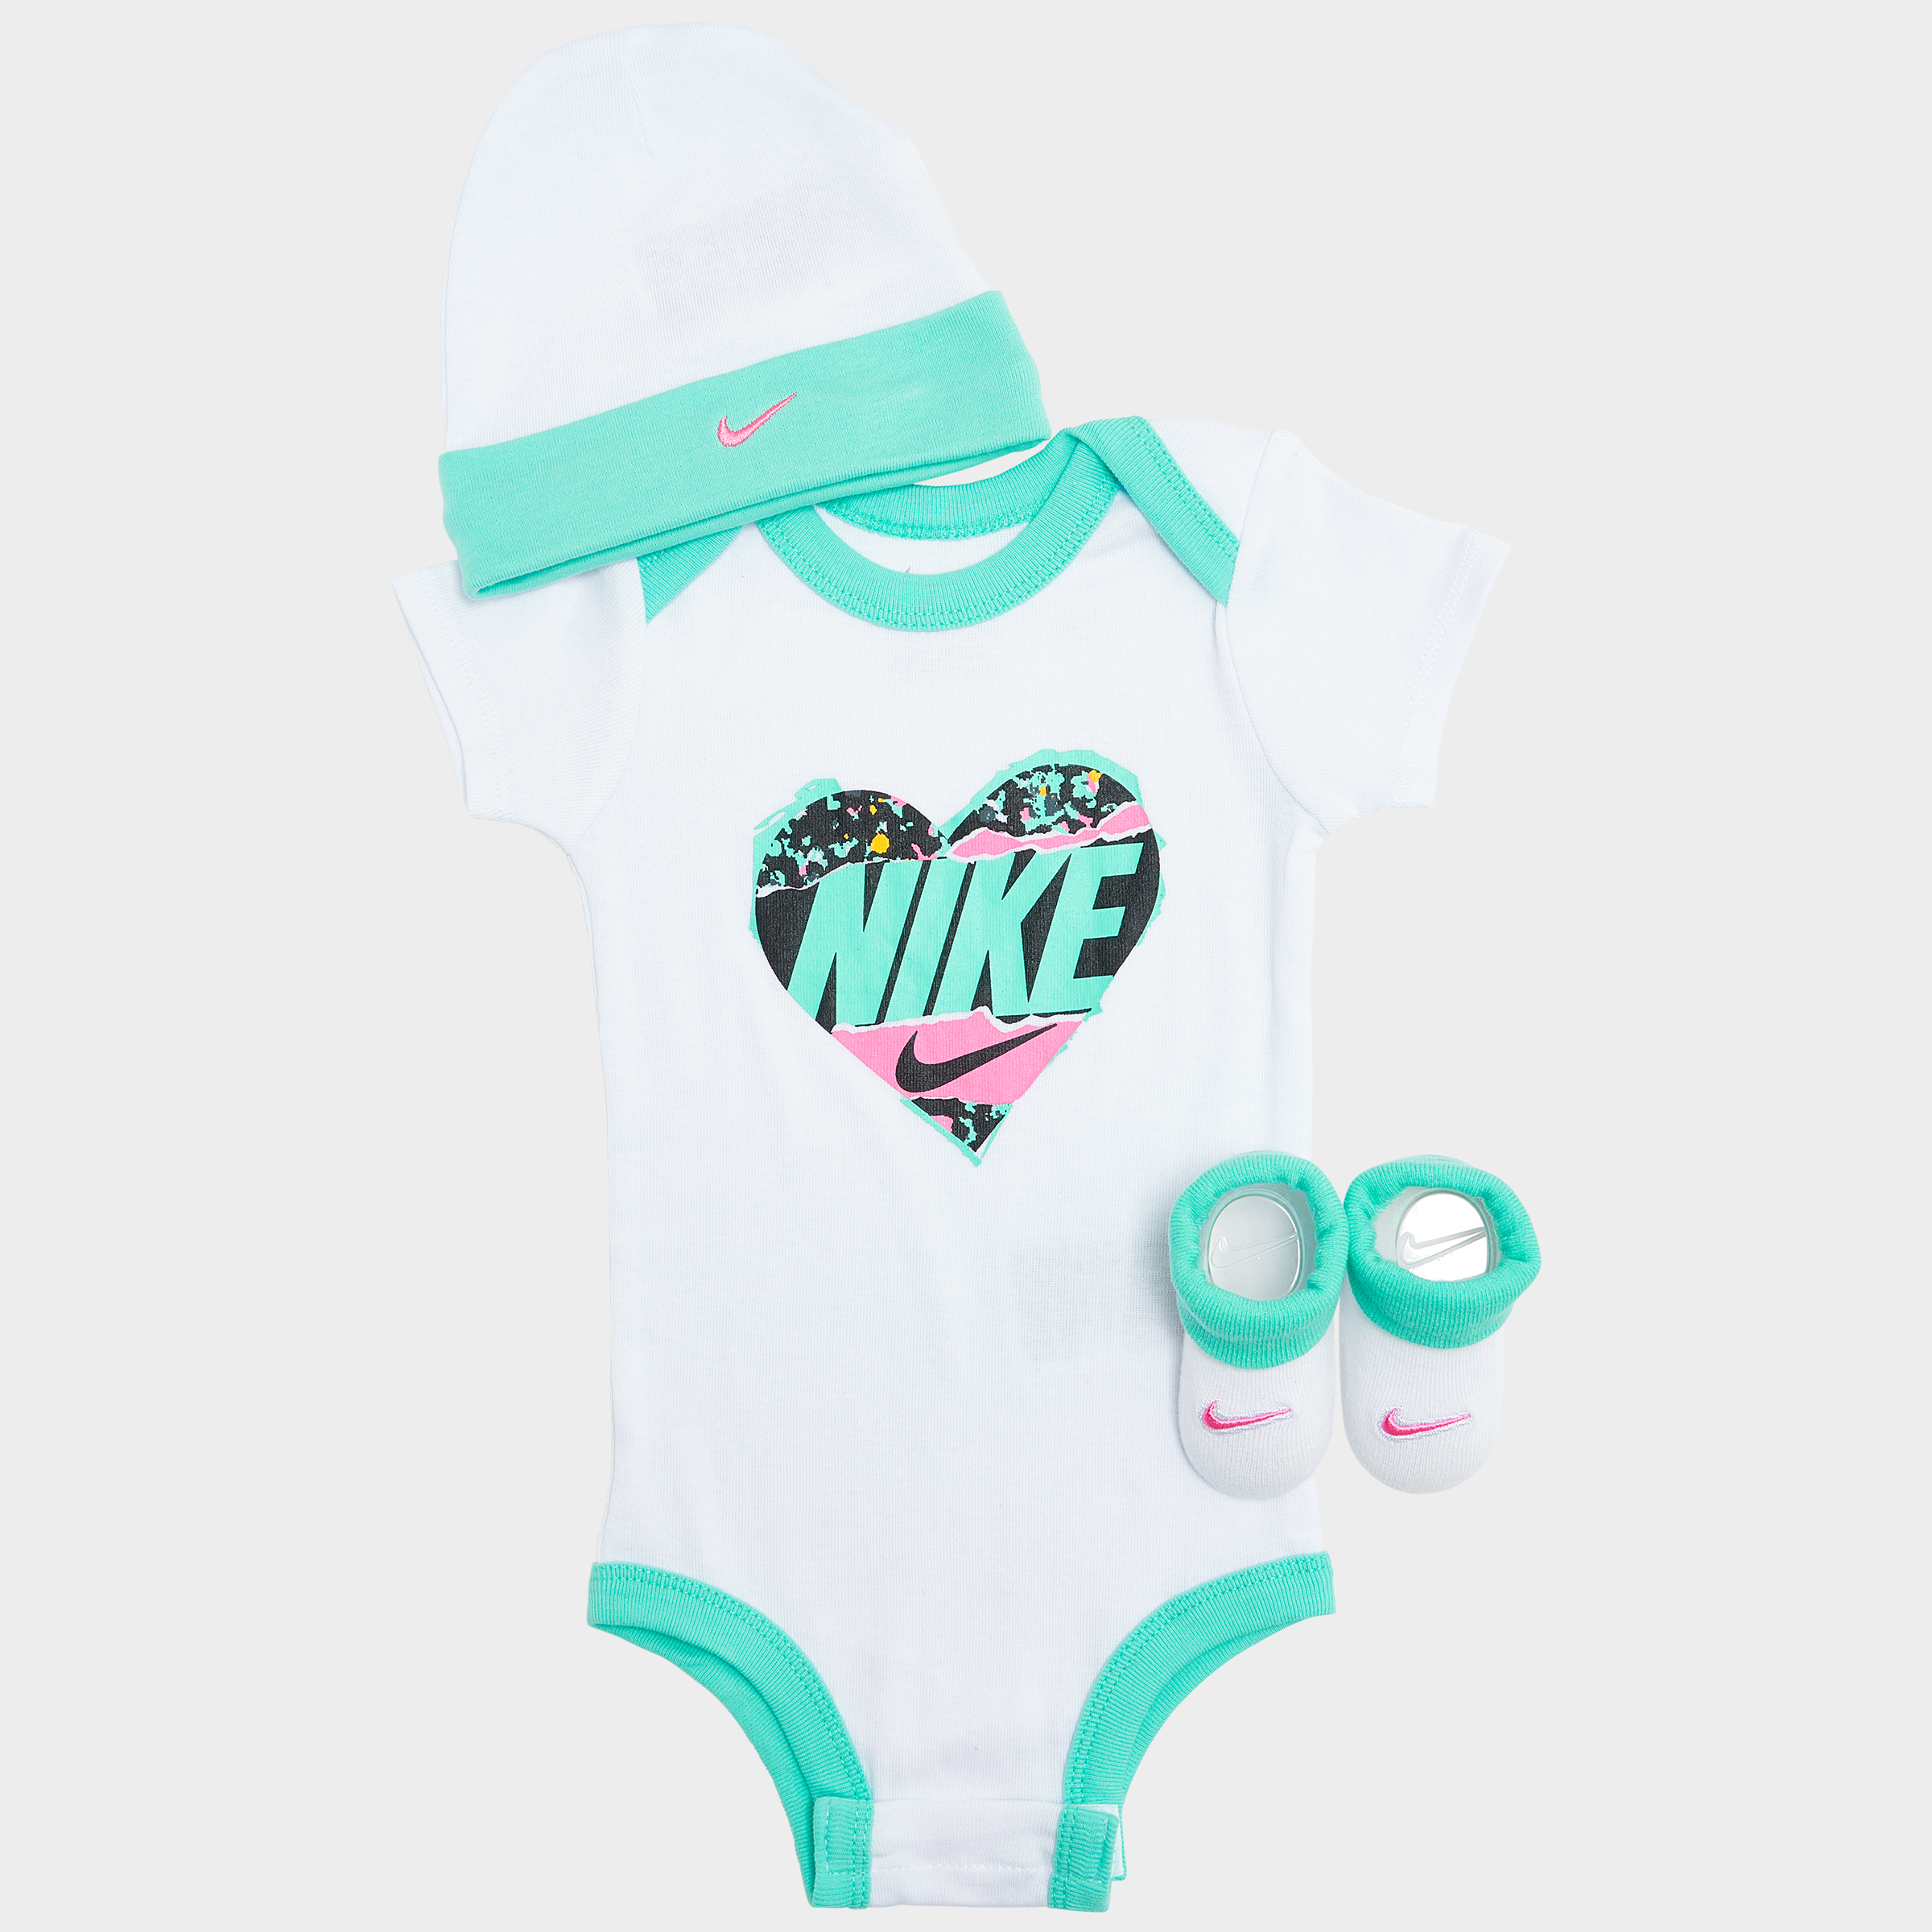 nike baby girl outfits